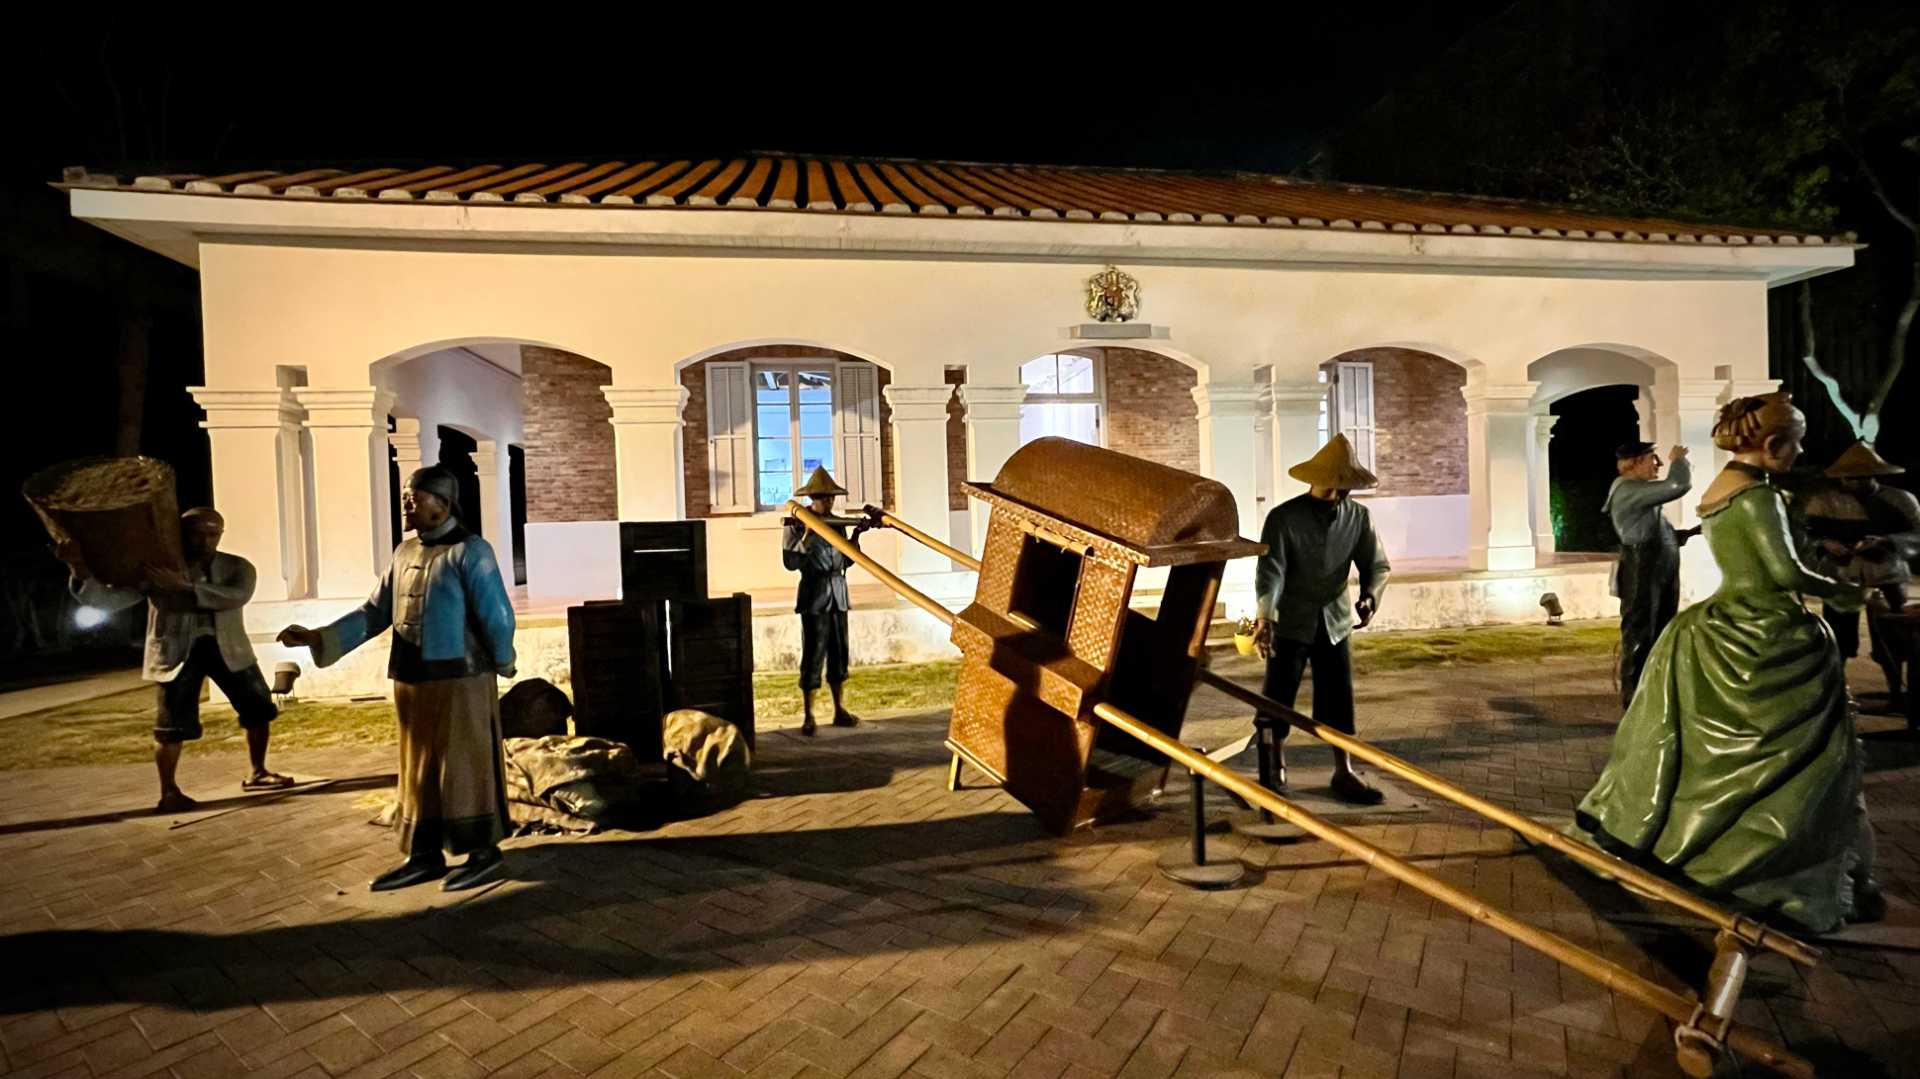 Life-size sculptures of a historic street scene outside the former Consulate Office building. Sculptures include people carrying bags and goods, and talking with each other.